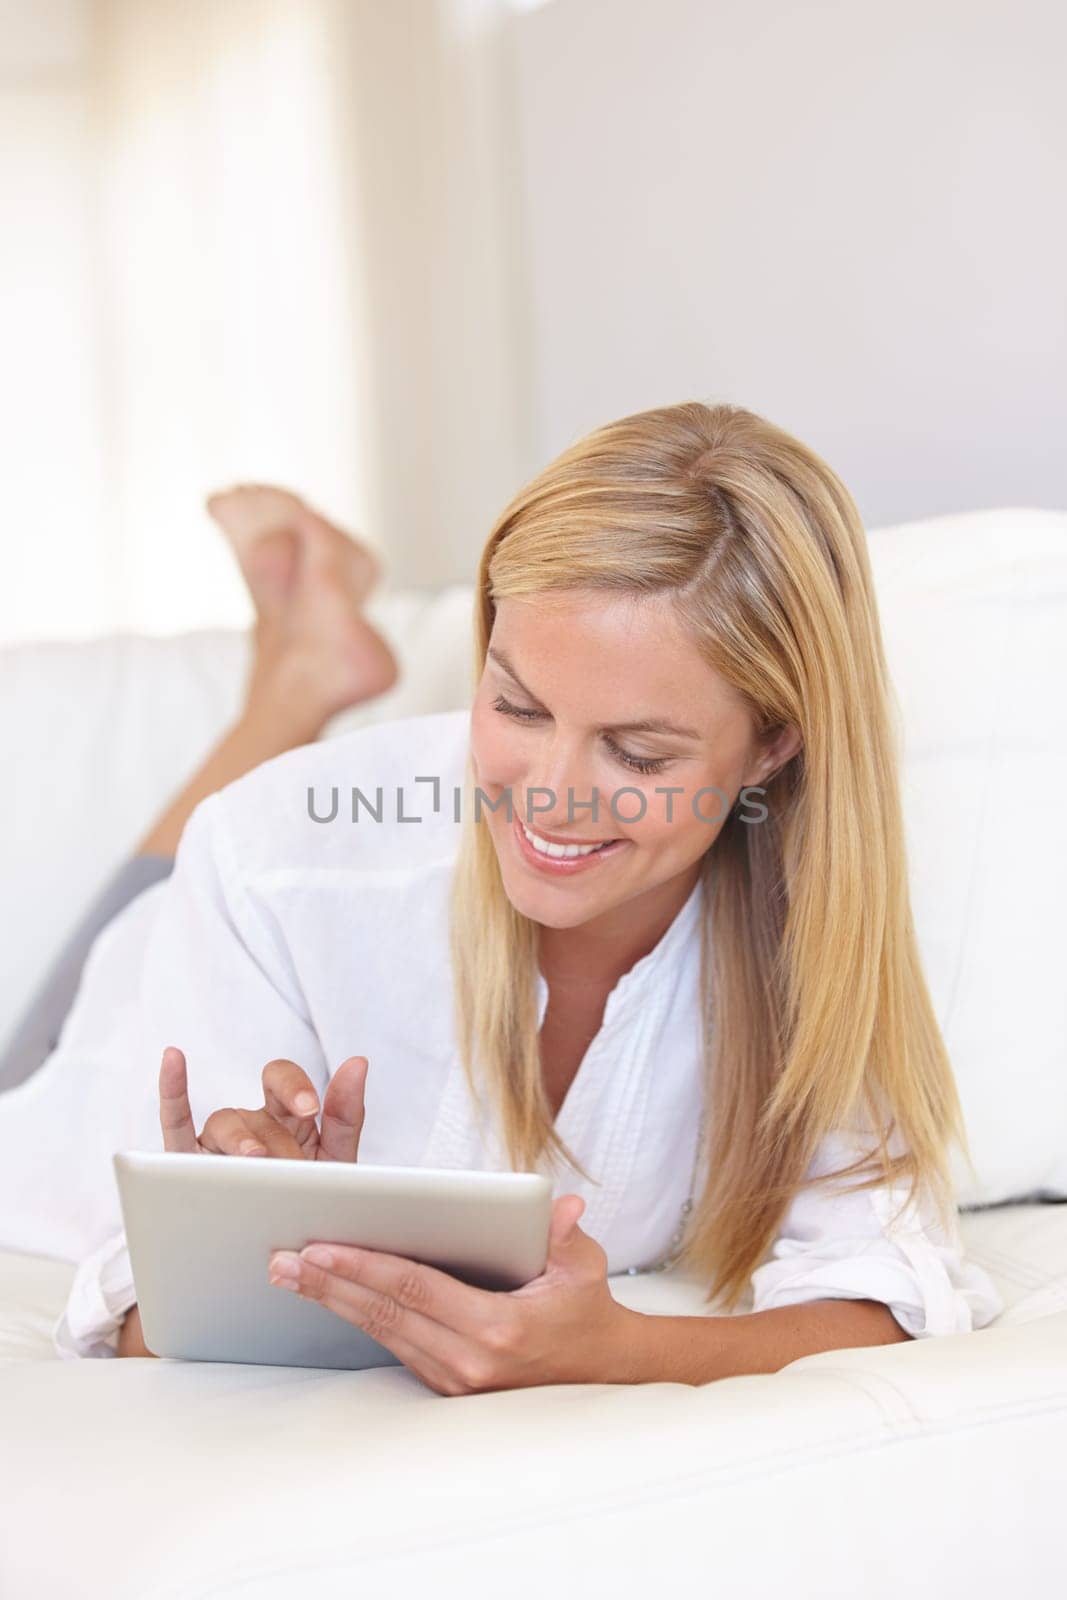 Home, bedroom and woman with a tablet, typing and communication with internet, social media and relax. Person, apartment and girl with technology, connection and digital app with a smile and network.